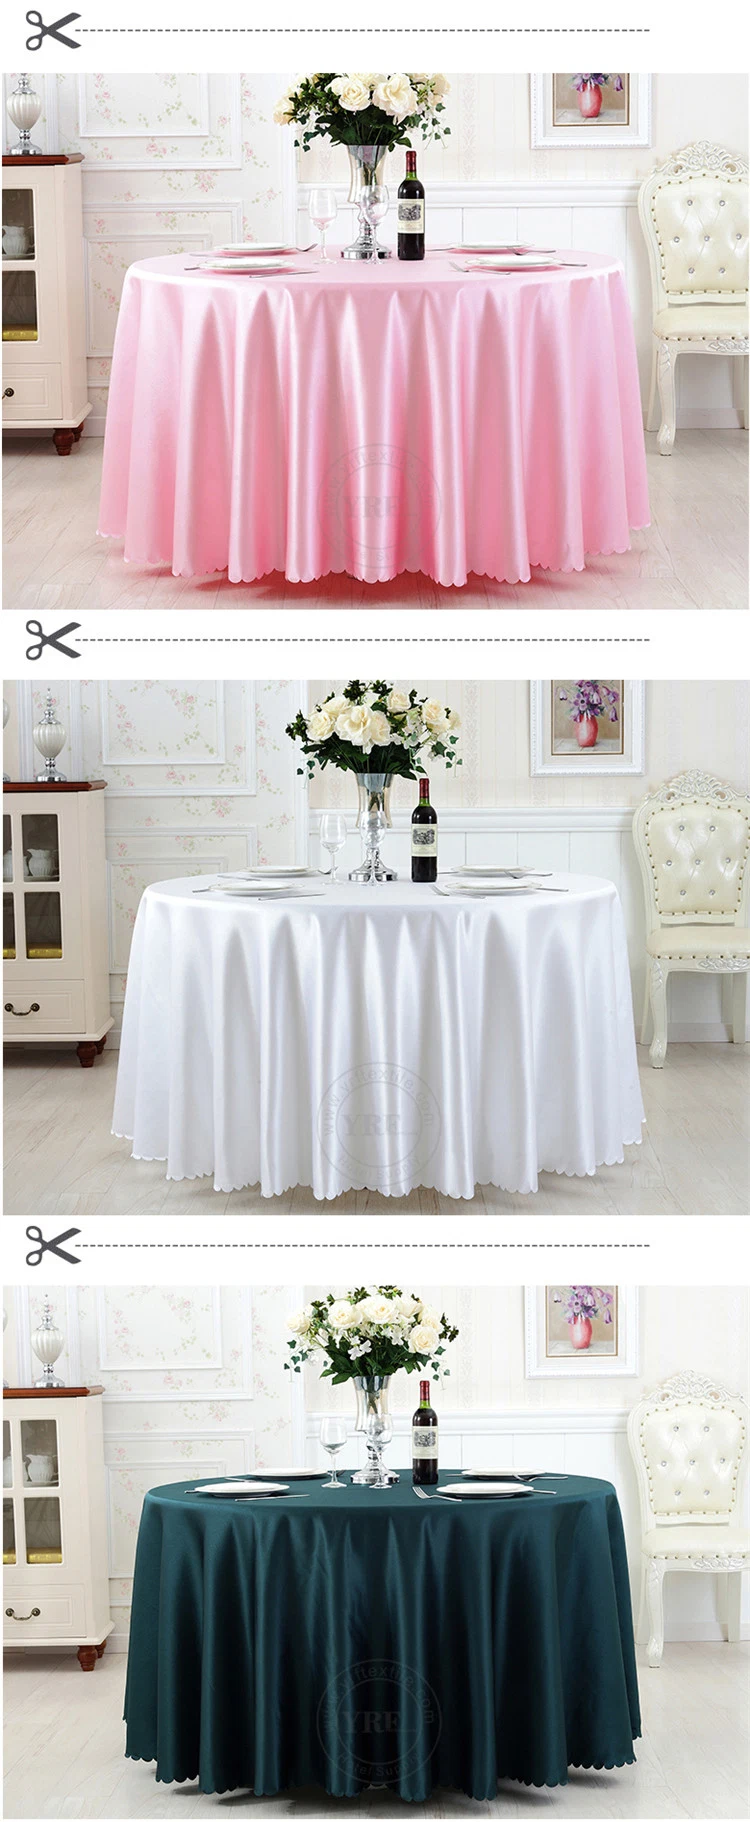 Hot Pink Round Tablecloth Plastic Disposable Table Cover